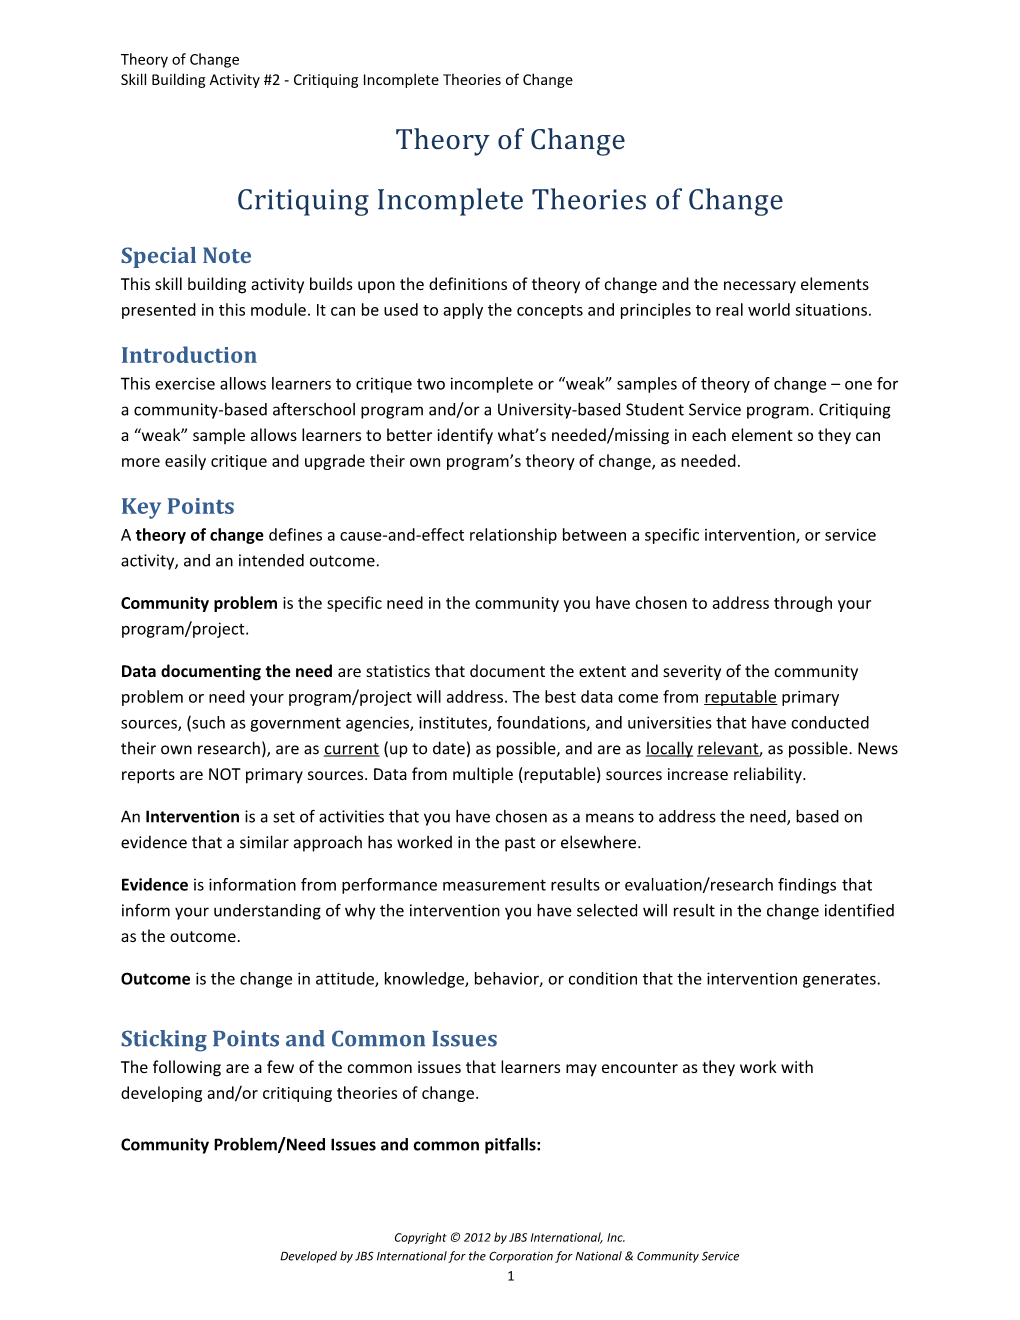 Skill Building Activity #2 - Critiquing Incomplete Theories of Change